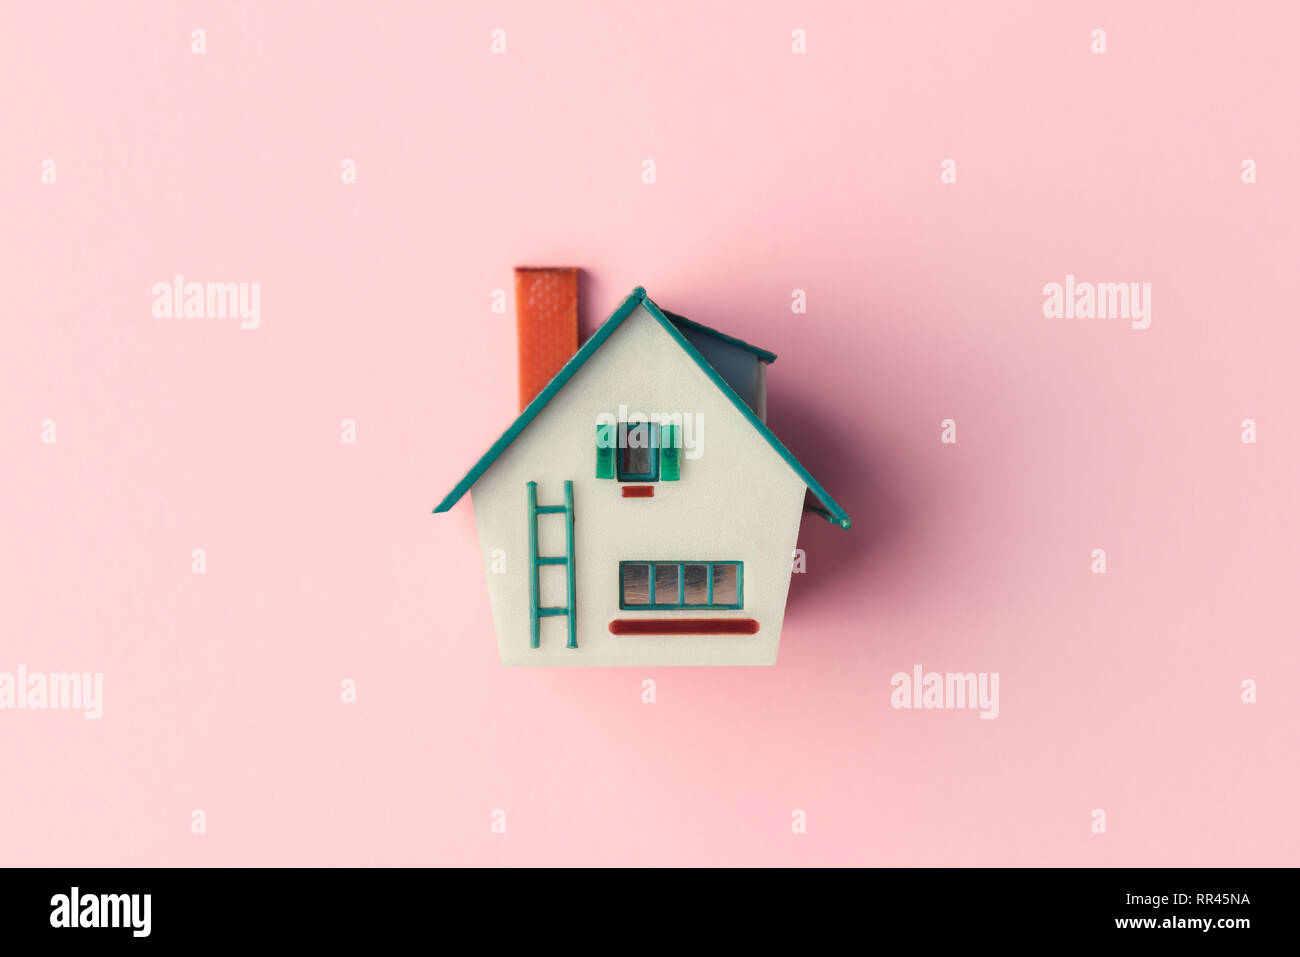 Plastic house model on pink background. Real estate concept Stock Photo